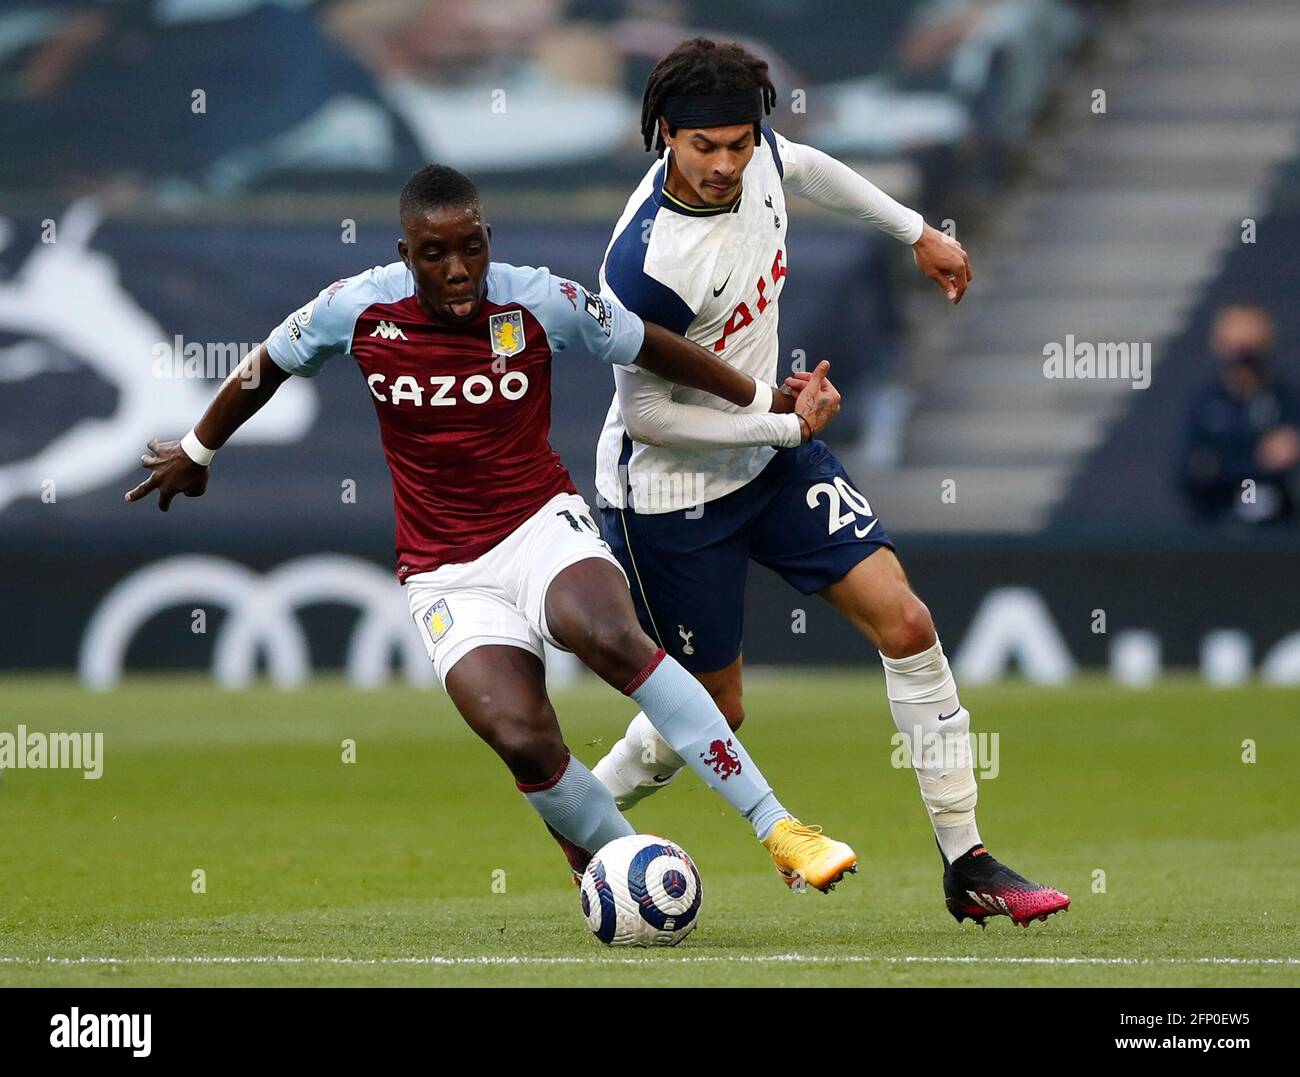 Aston Villa's Marvelous Nakamba (left) and Tottenham Hotspur's Dele Alli battle for the ball during the Premier League match at the Tottenham Hotspur Stadium, London. Picture date: Wednesday May 19, 2021. Stock Photo